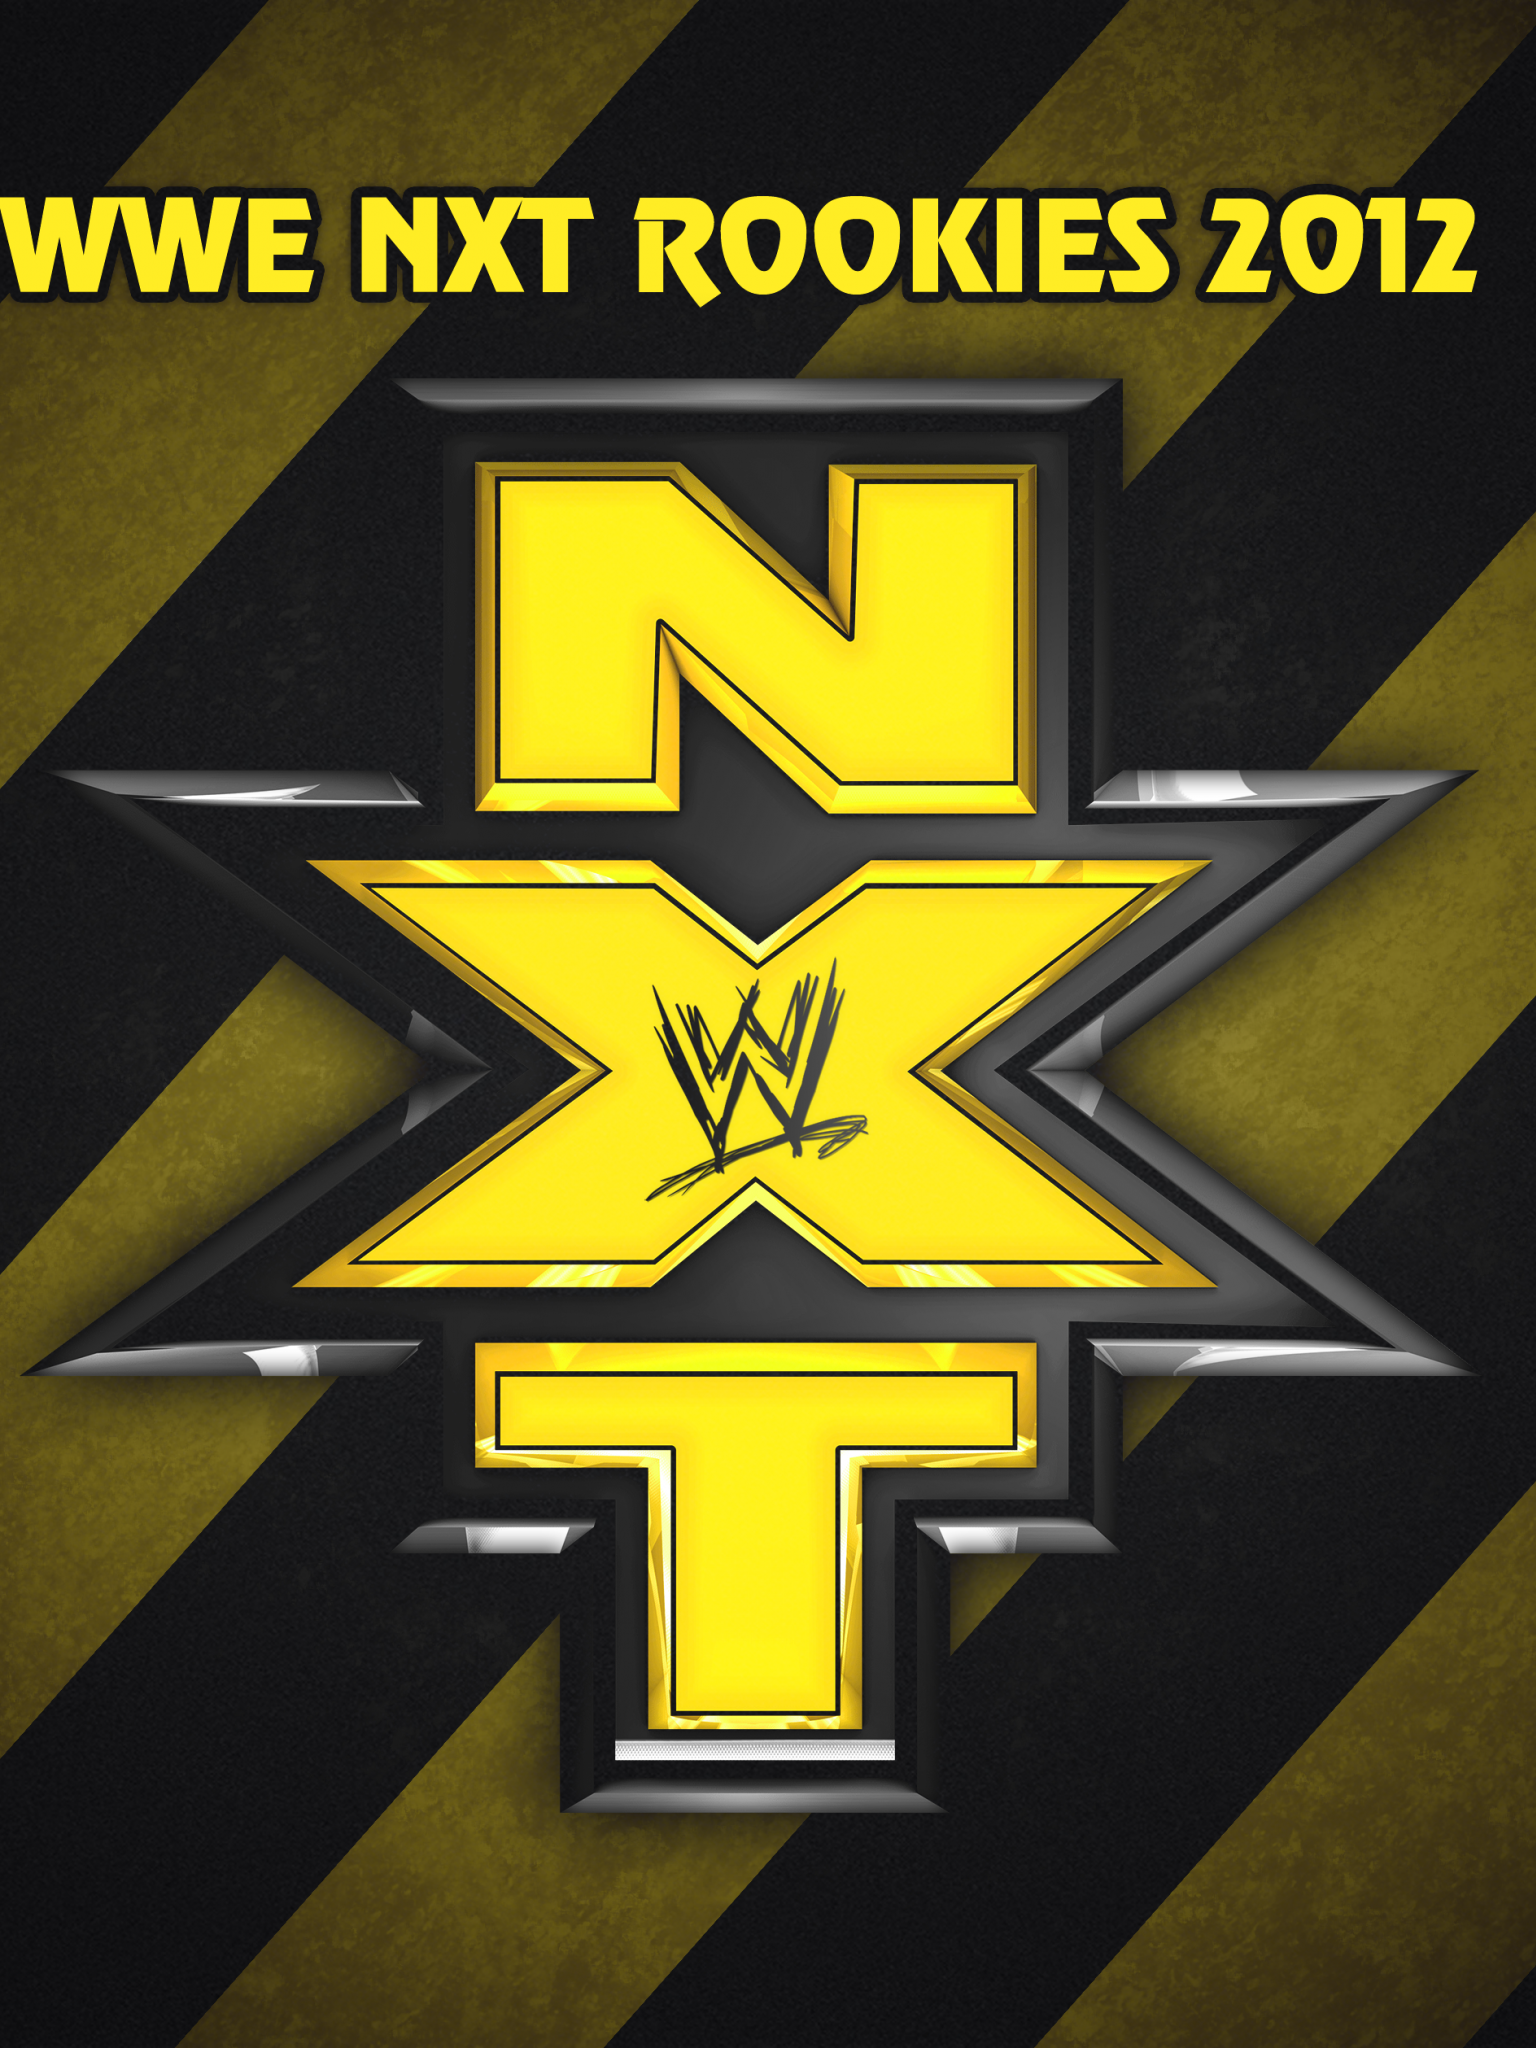 Free download WWE NXT 2012 by DecadeofSmackdownV3 [4411x2517]